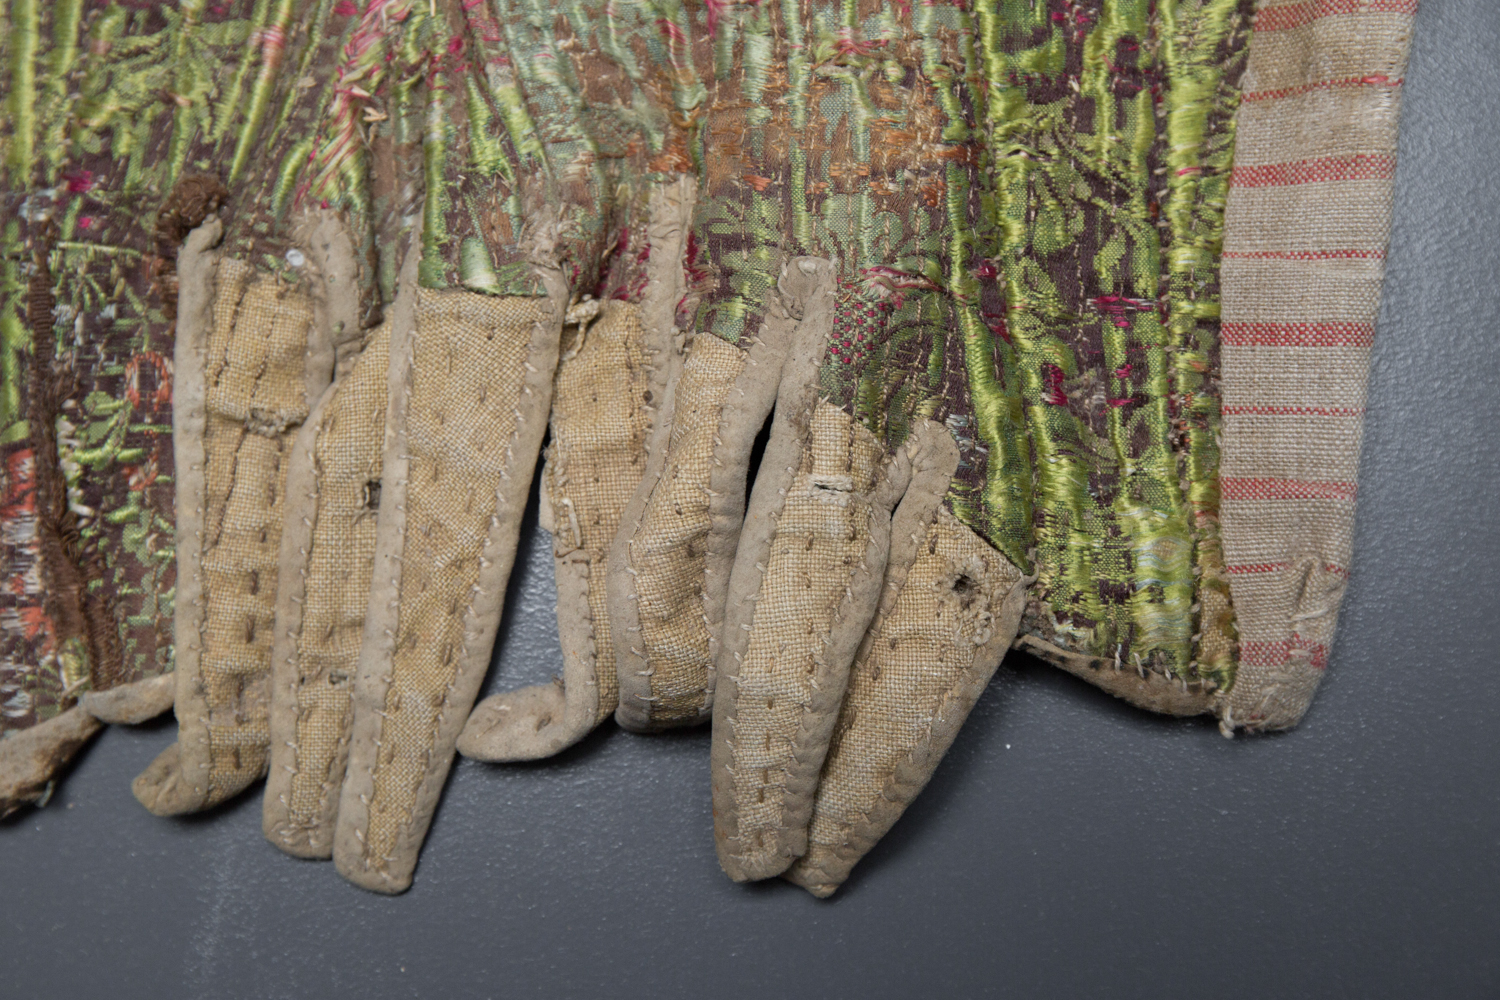 Silk Brocade Whaleboned Stays, c. 1770s, Austria. The Underpinnings Museum. Photography by Tigz Rice.